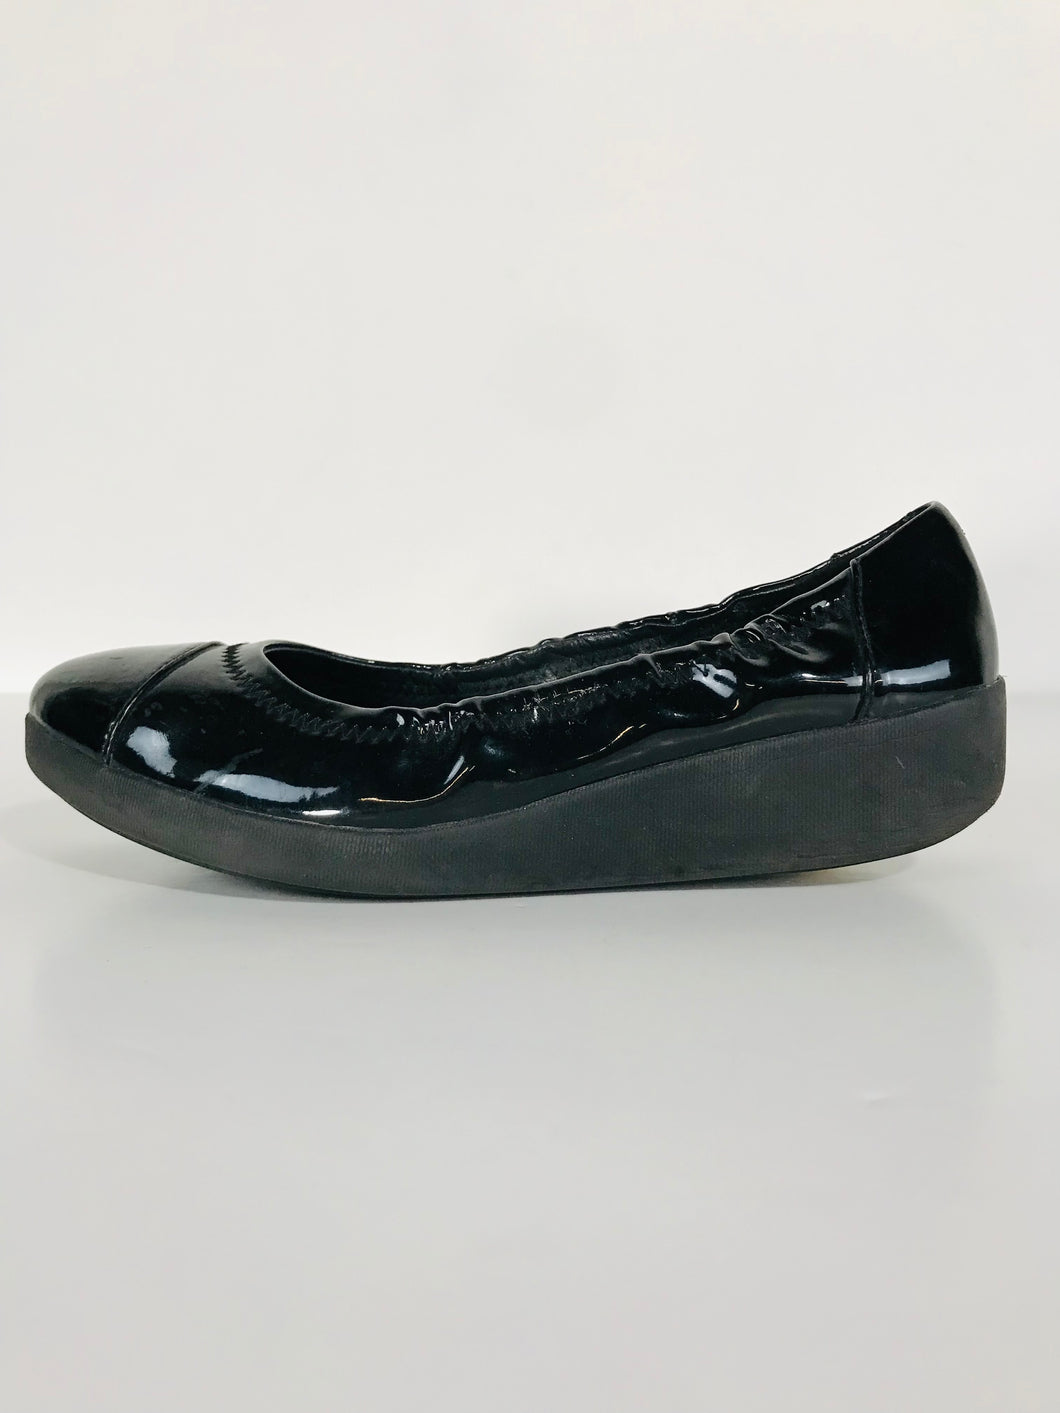 Fitflop Women's Patent Leather Slip-on Shoes | EU38 UK5 | Black